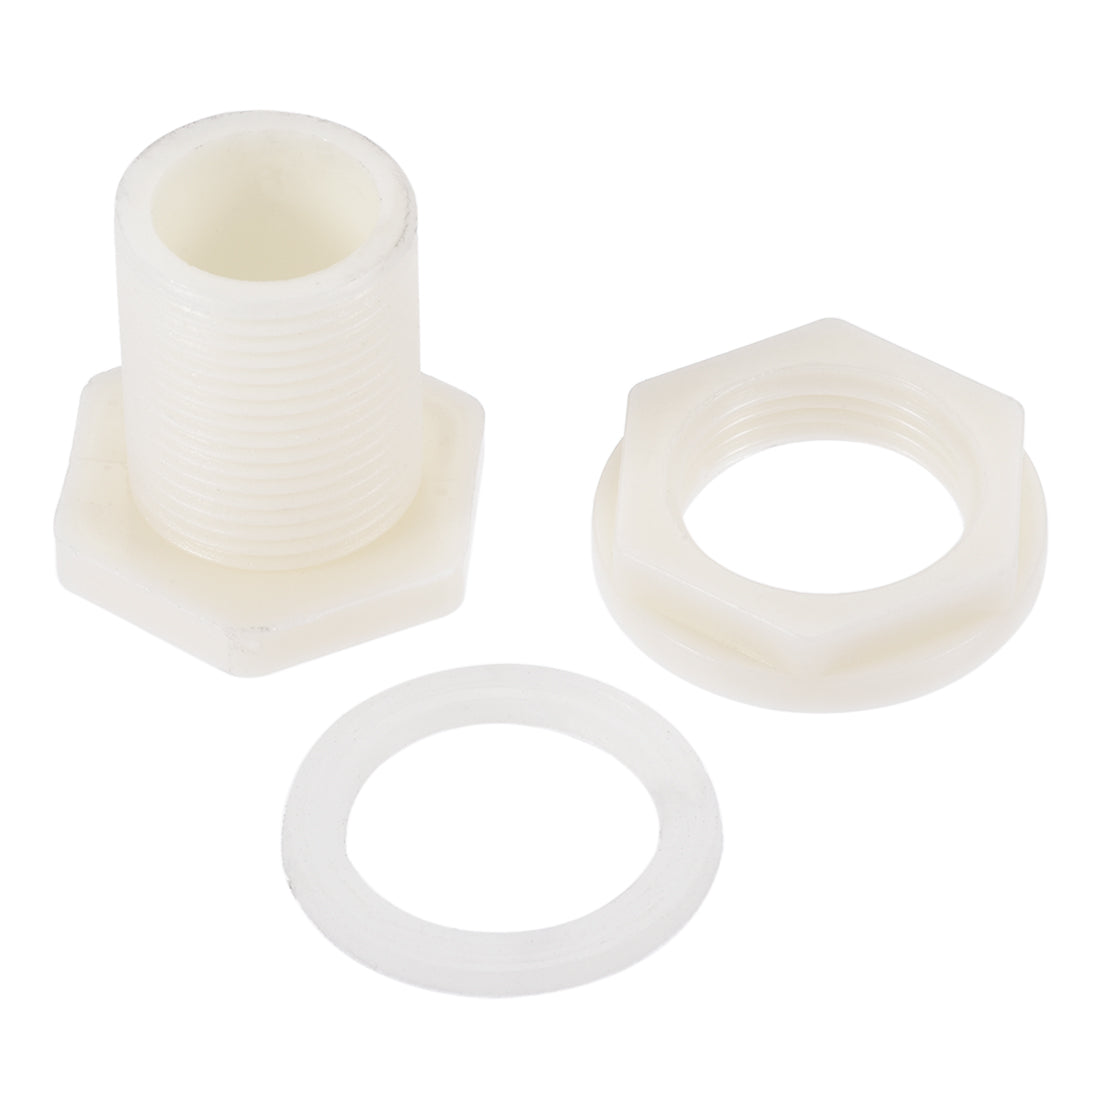 Uxcell Uxcell Bulkhead Fitting, G3/4 Male, Tube Adaptor Pipe Fitting with Silicone Gasket, for Water Tanks, ABS Plastic, White